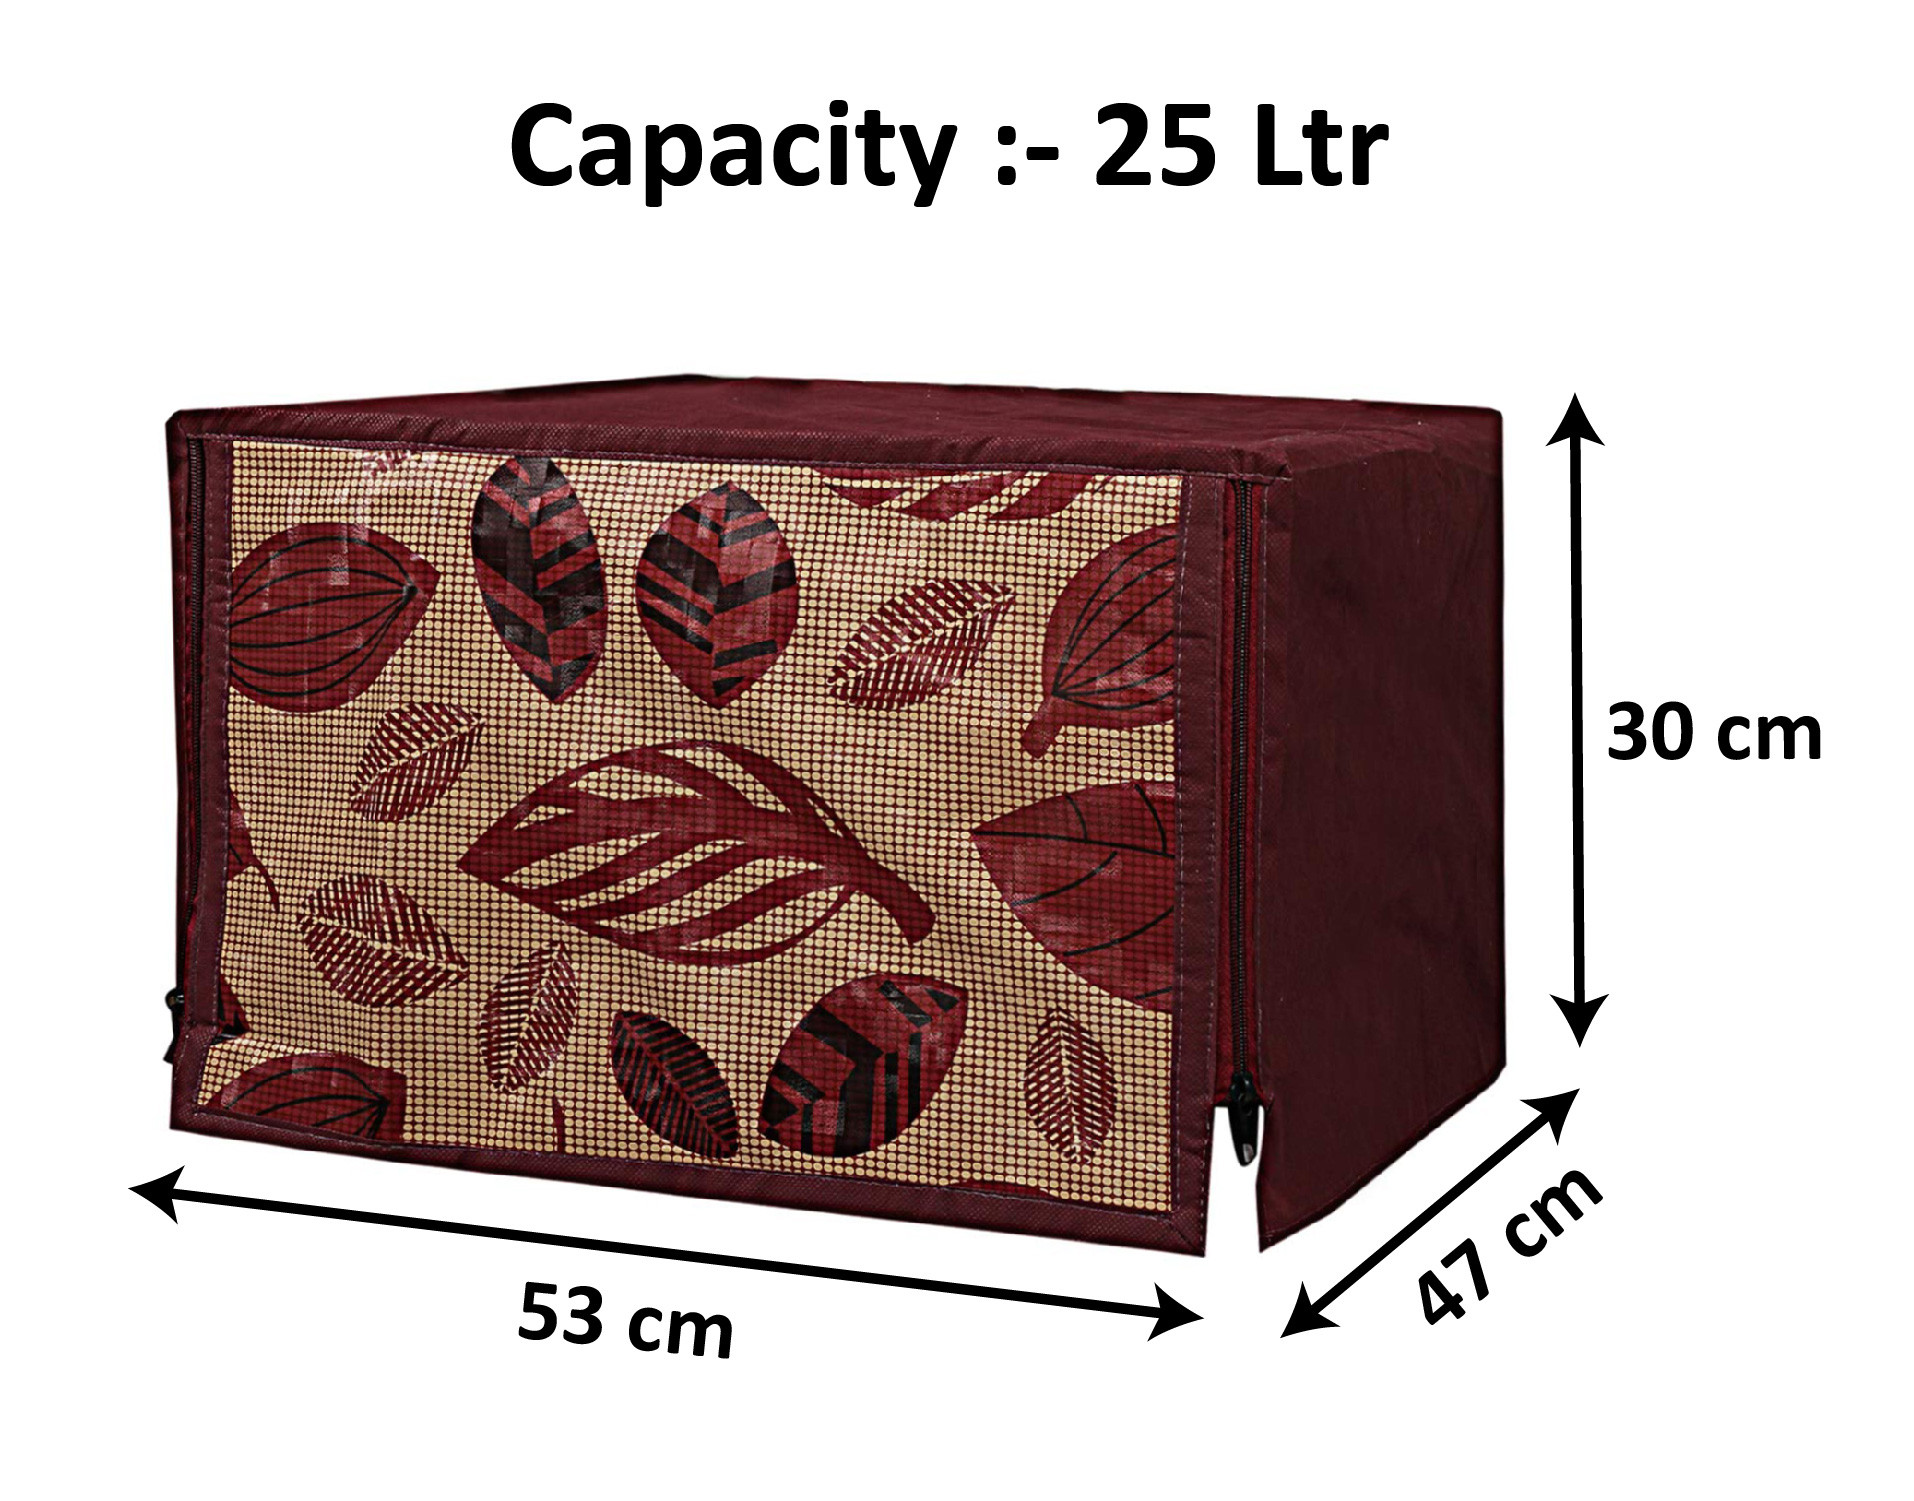 Kuber Industries PVC Leaf Printed Microwave Oven Cover,25 Ltr. (Brown)-HS43KUBMART25965